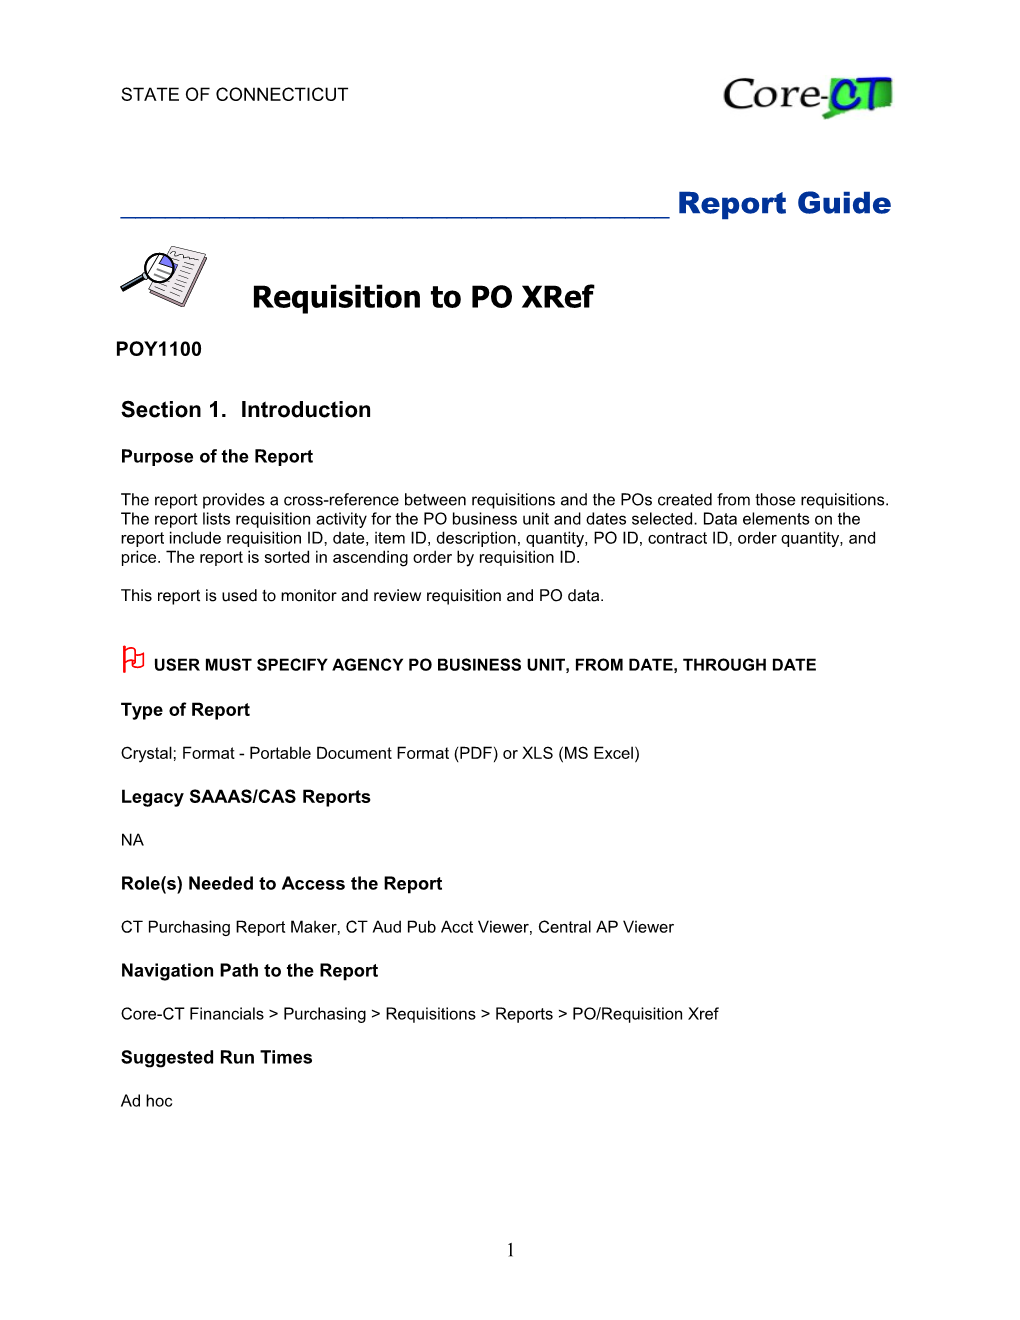 Requisition to PO XREF (POY1100)